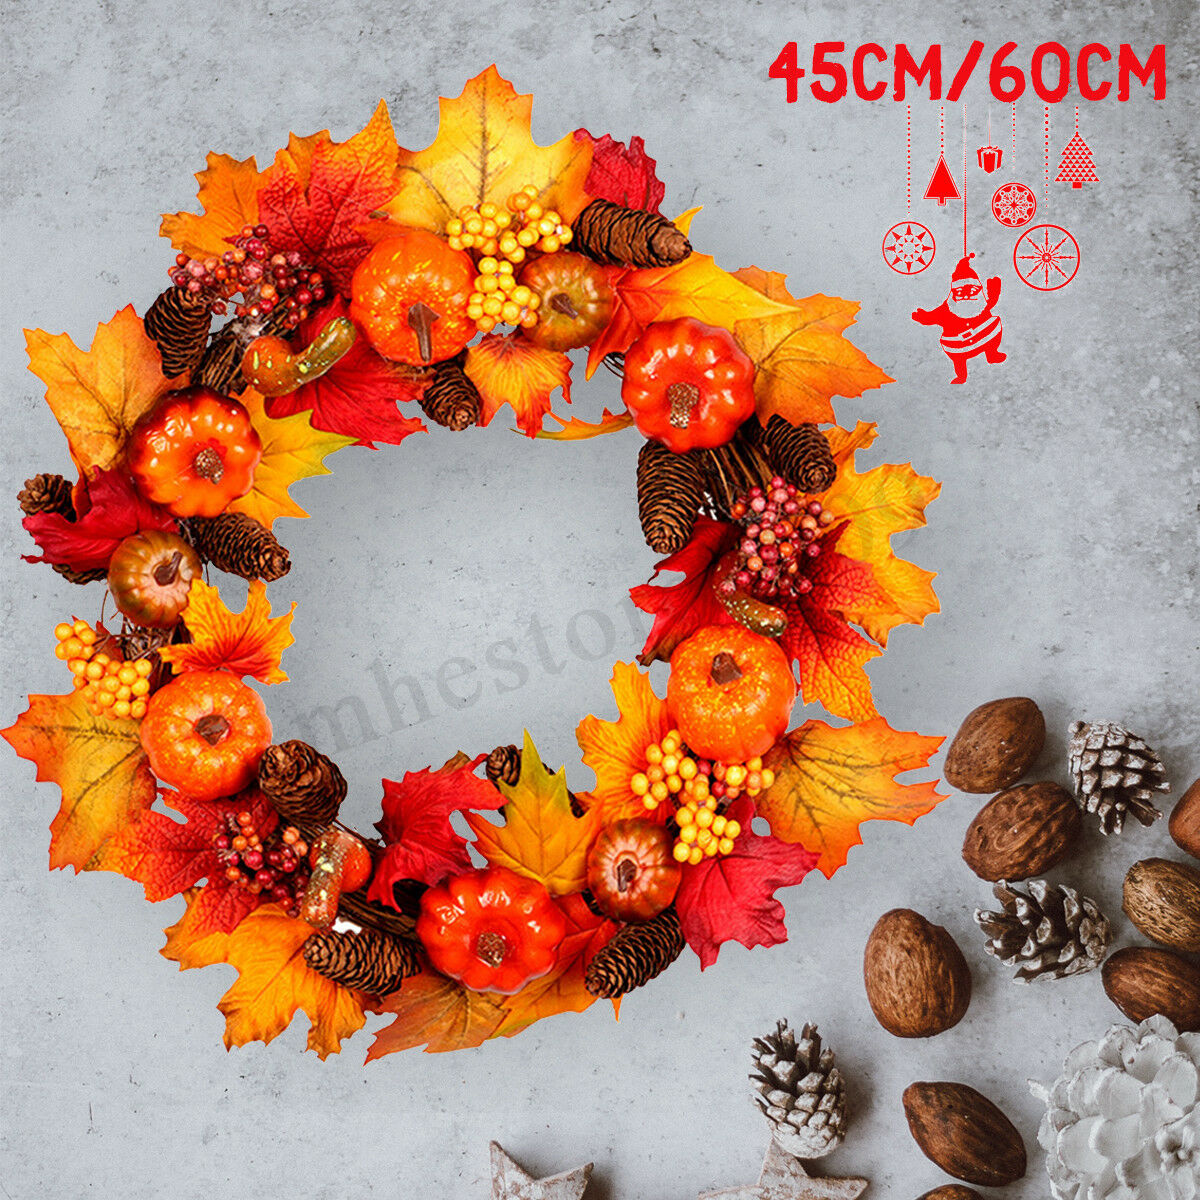 4560cm-Wreath-Garland-Maple-Leaves-Pumpkin-Door-For-Christmas-Party-Decorations-1637102-9